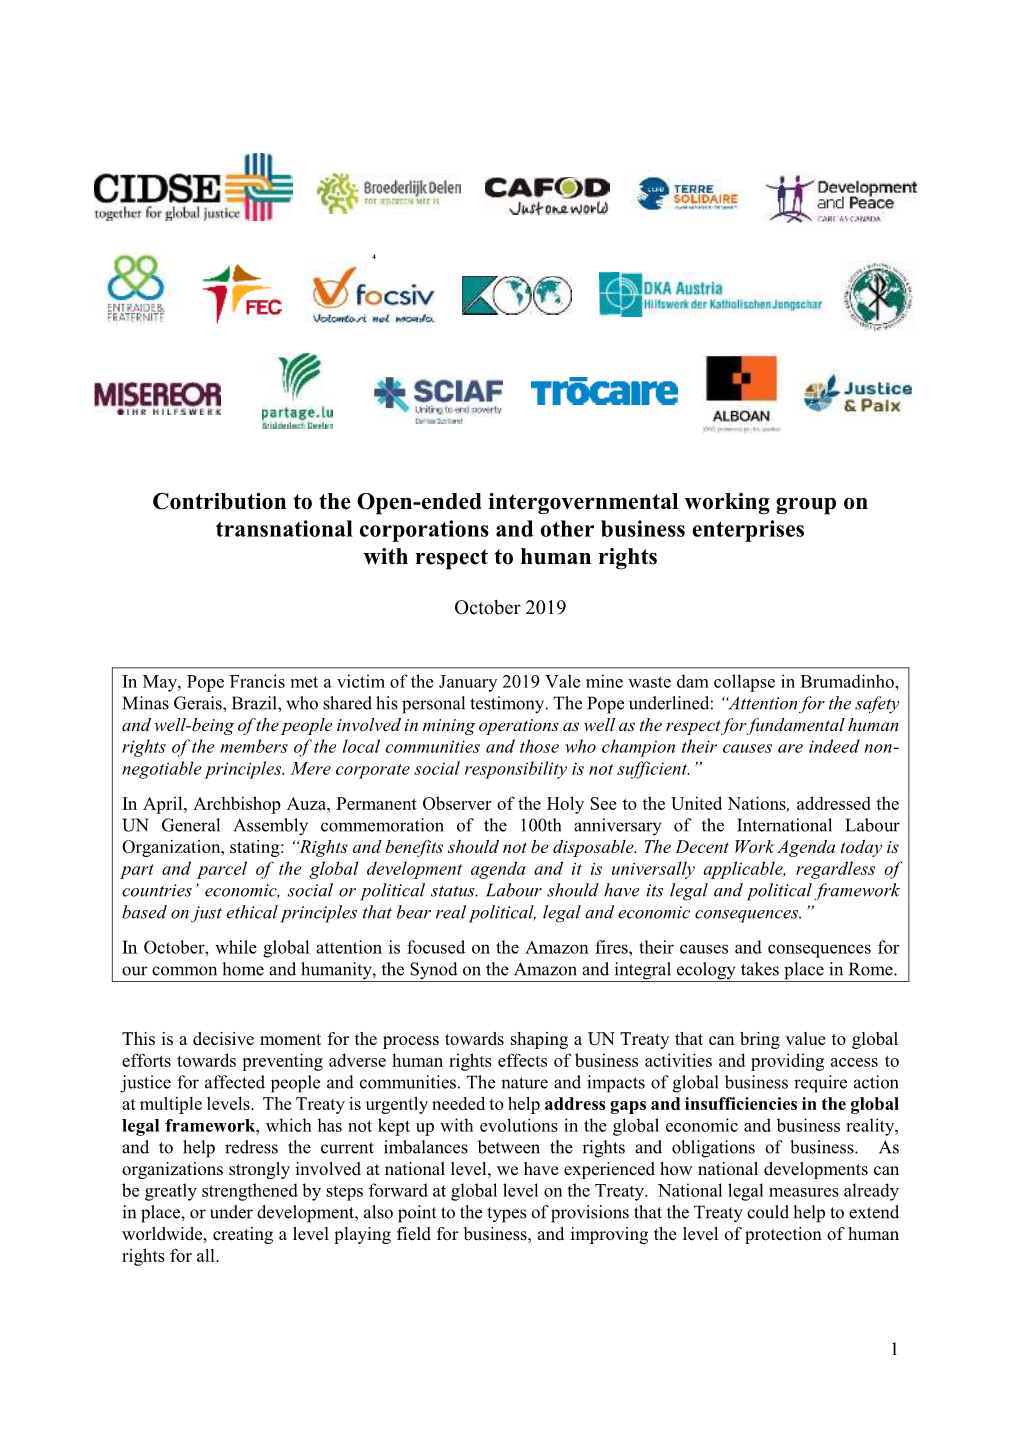 Contribution to the Open-Ended Intergovernmental Working Group on Transnational Corporations and Other Business Enterprises with Respect to Human Rights